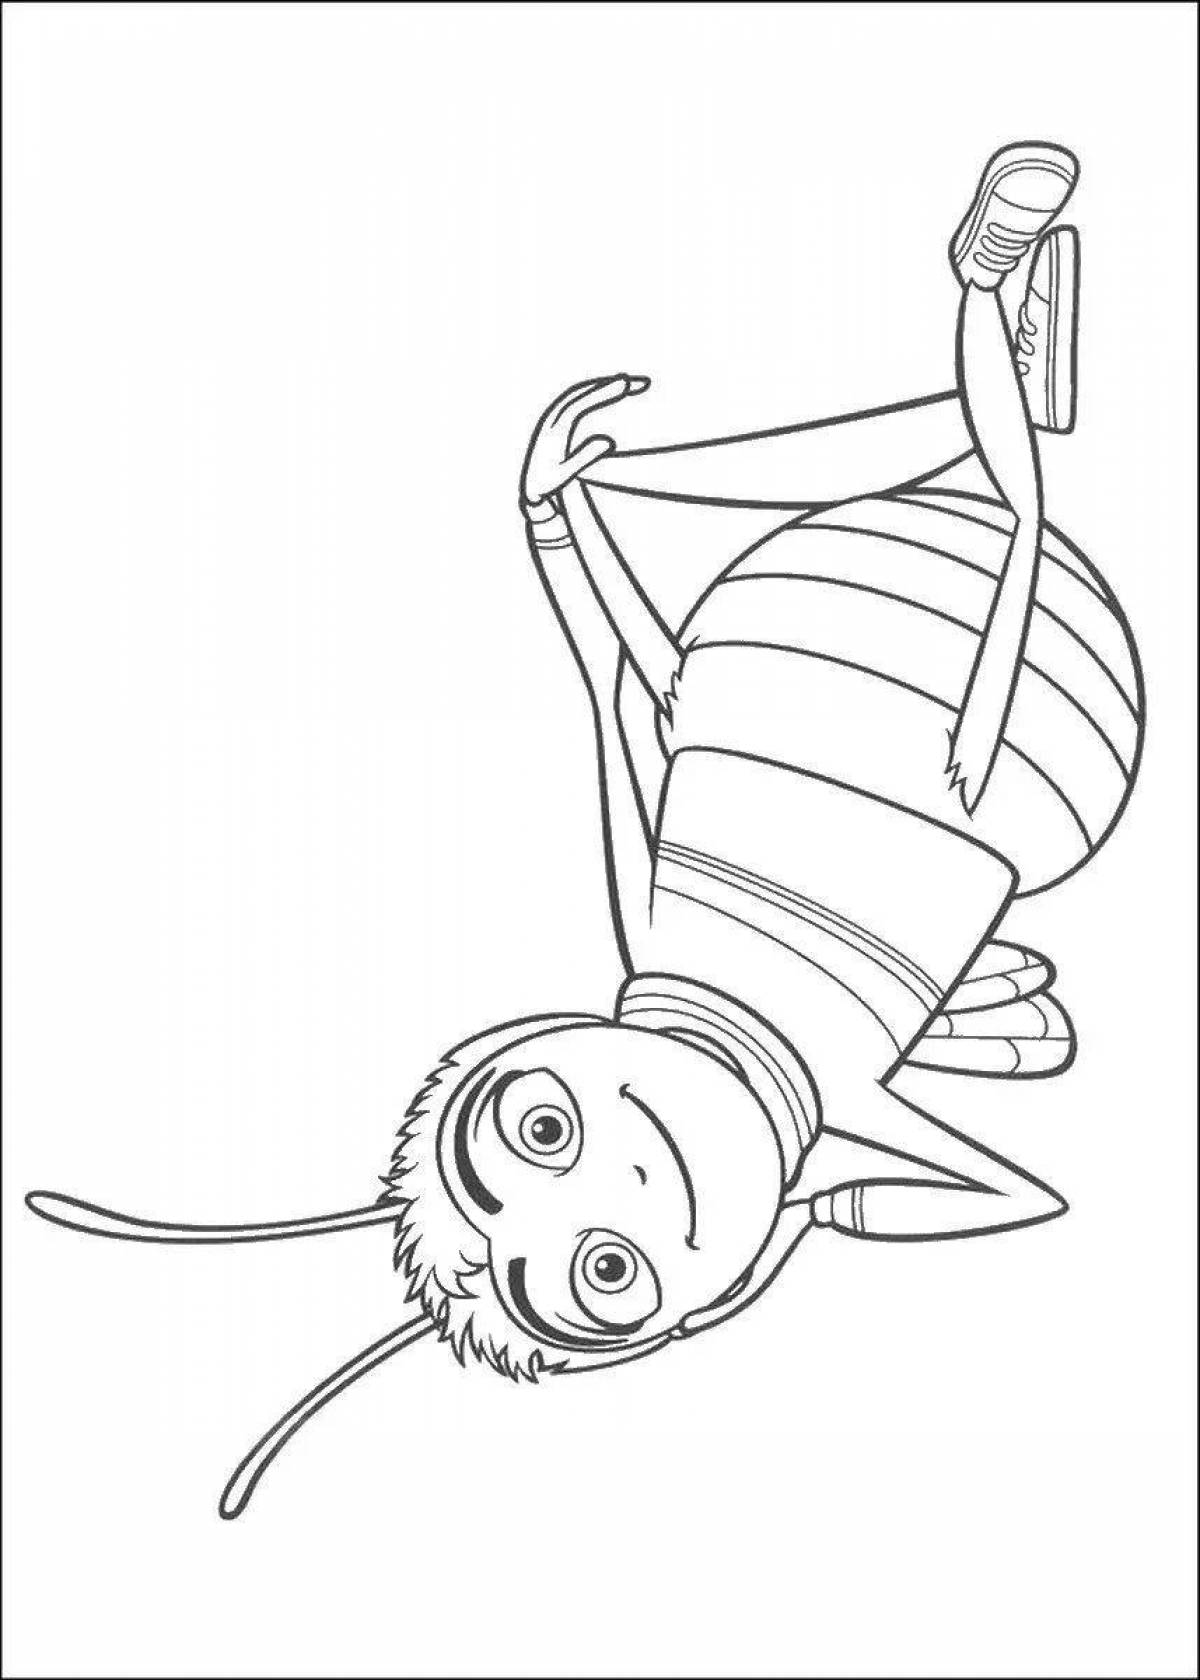 Glitter honey plot coloring page